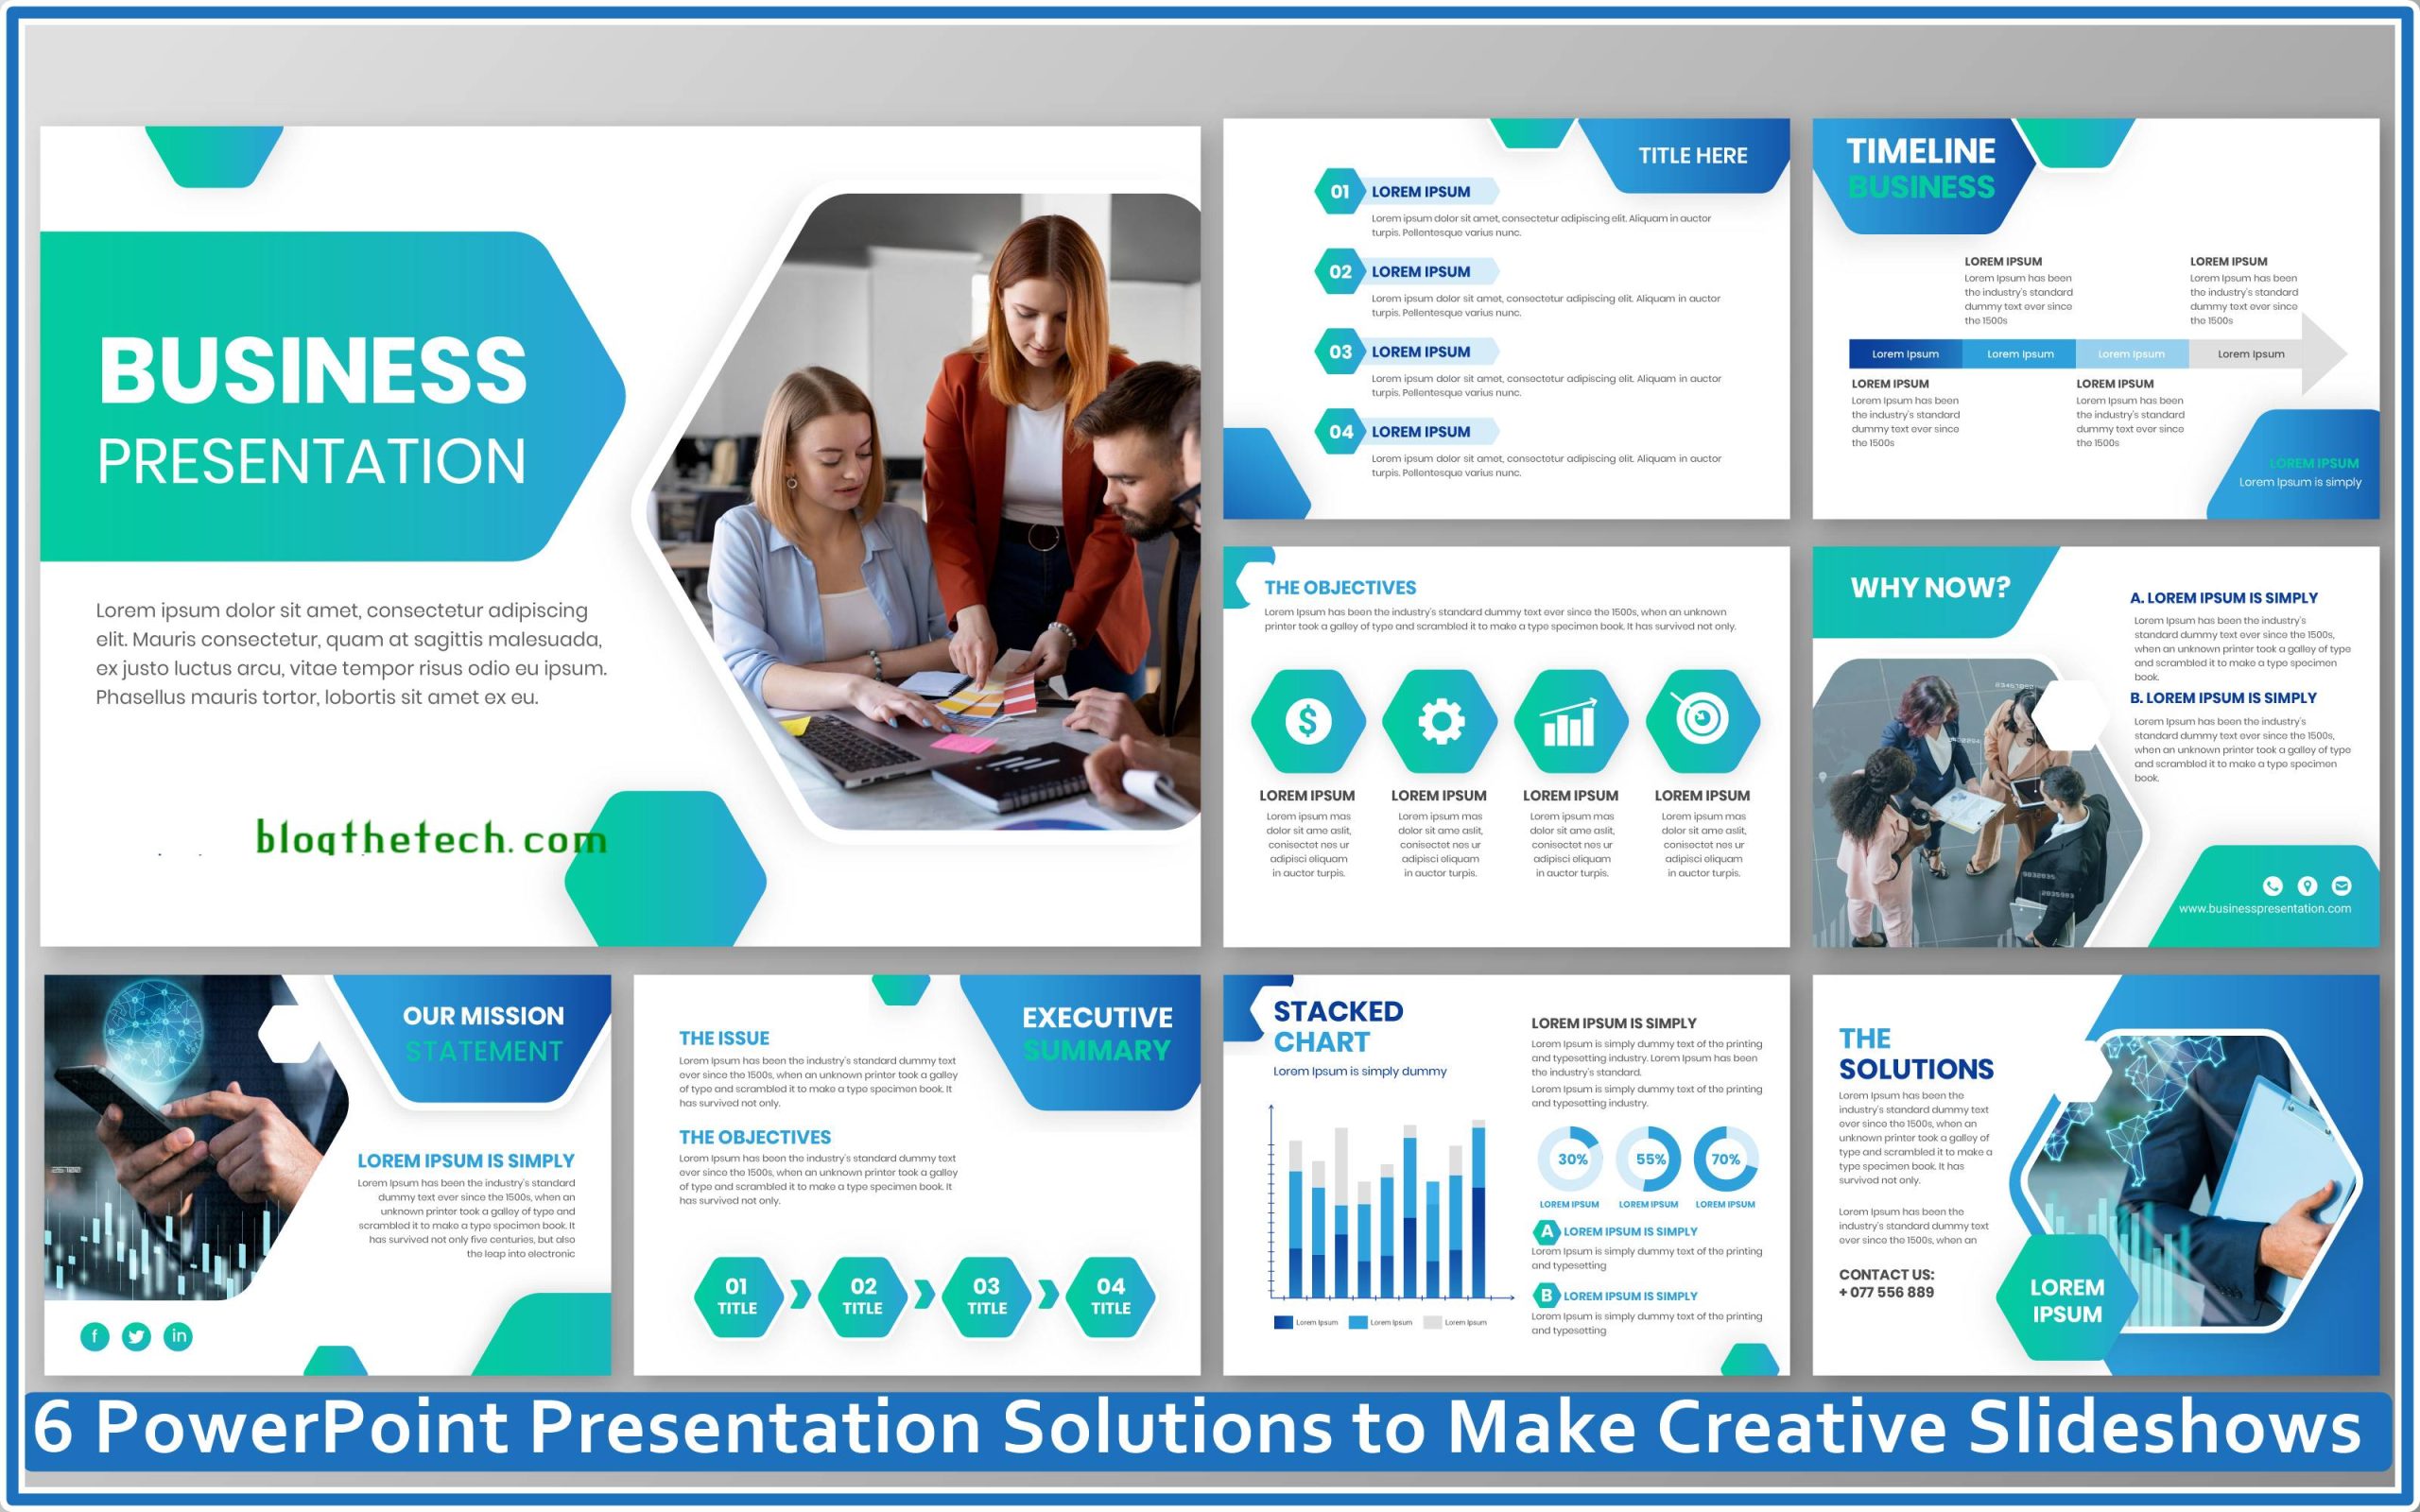 6 PowerPoint Presentation Solutions to Make Creative Slideshows